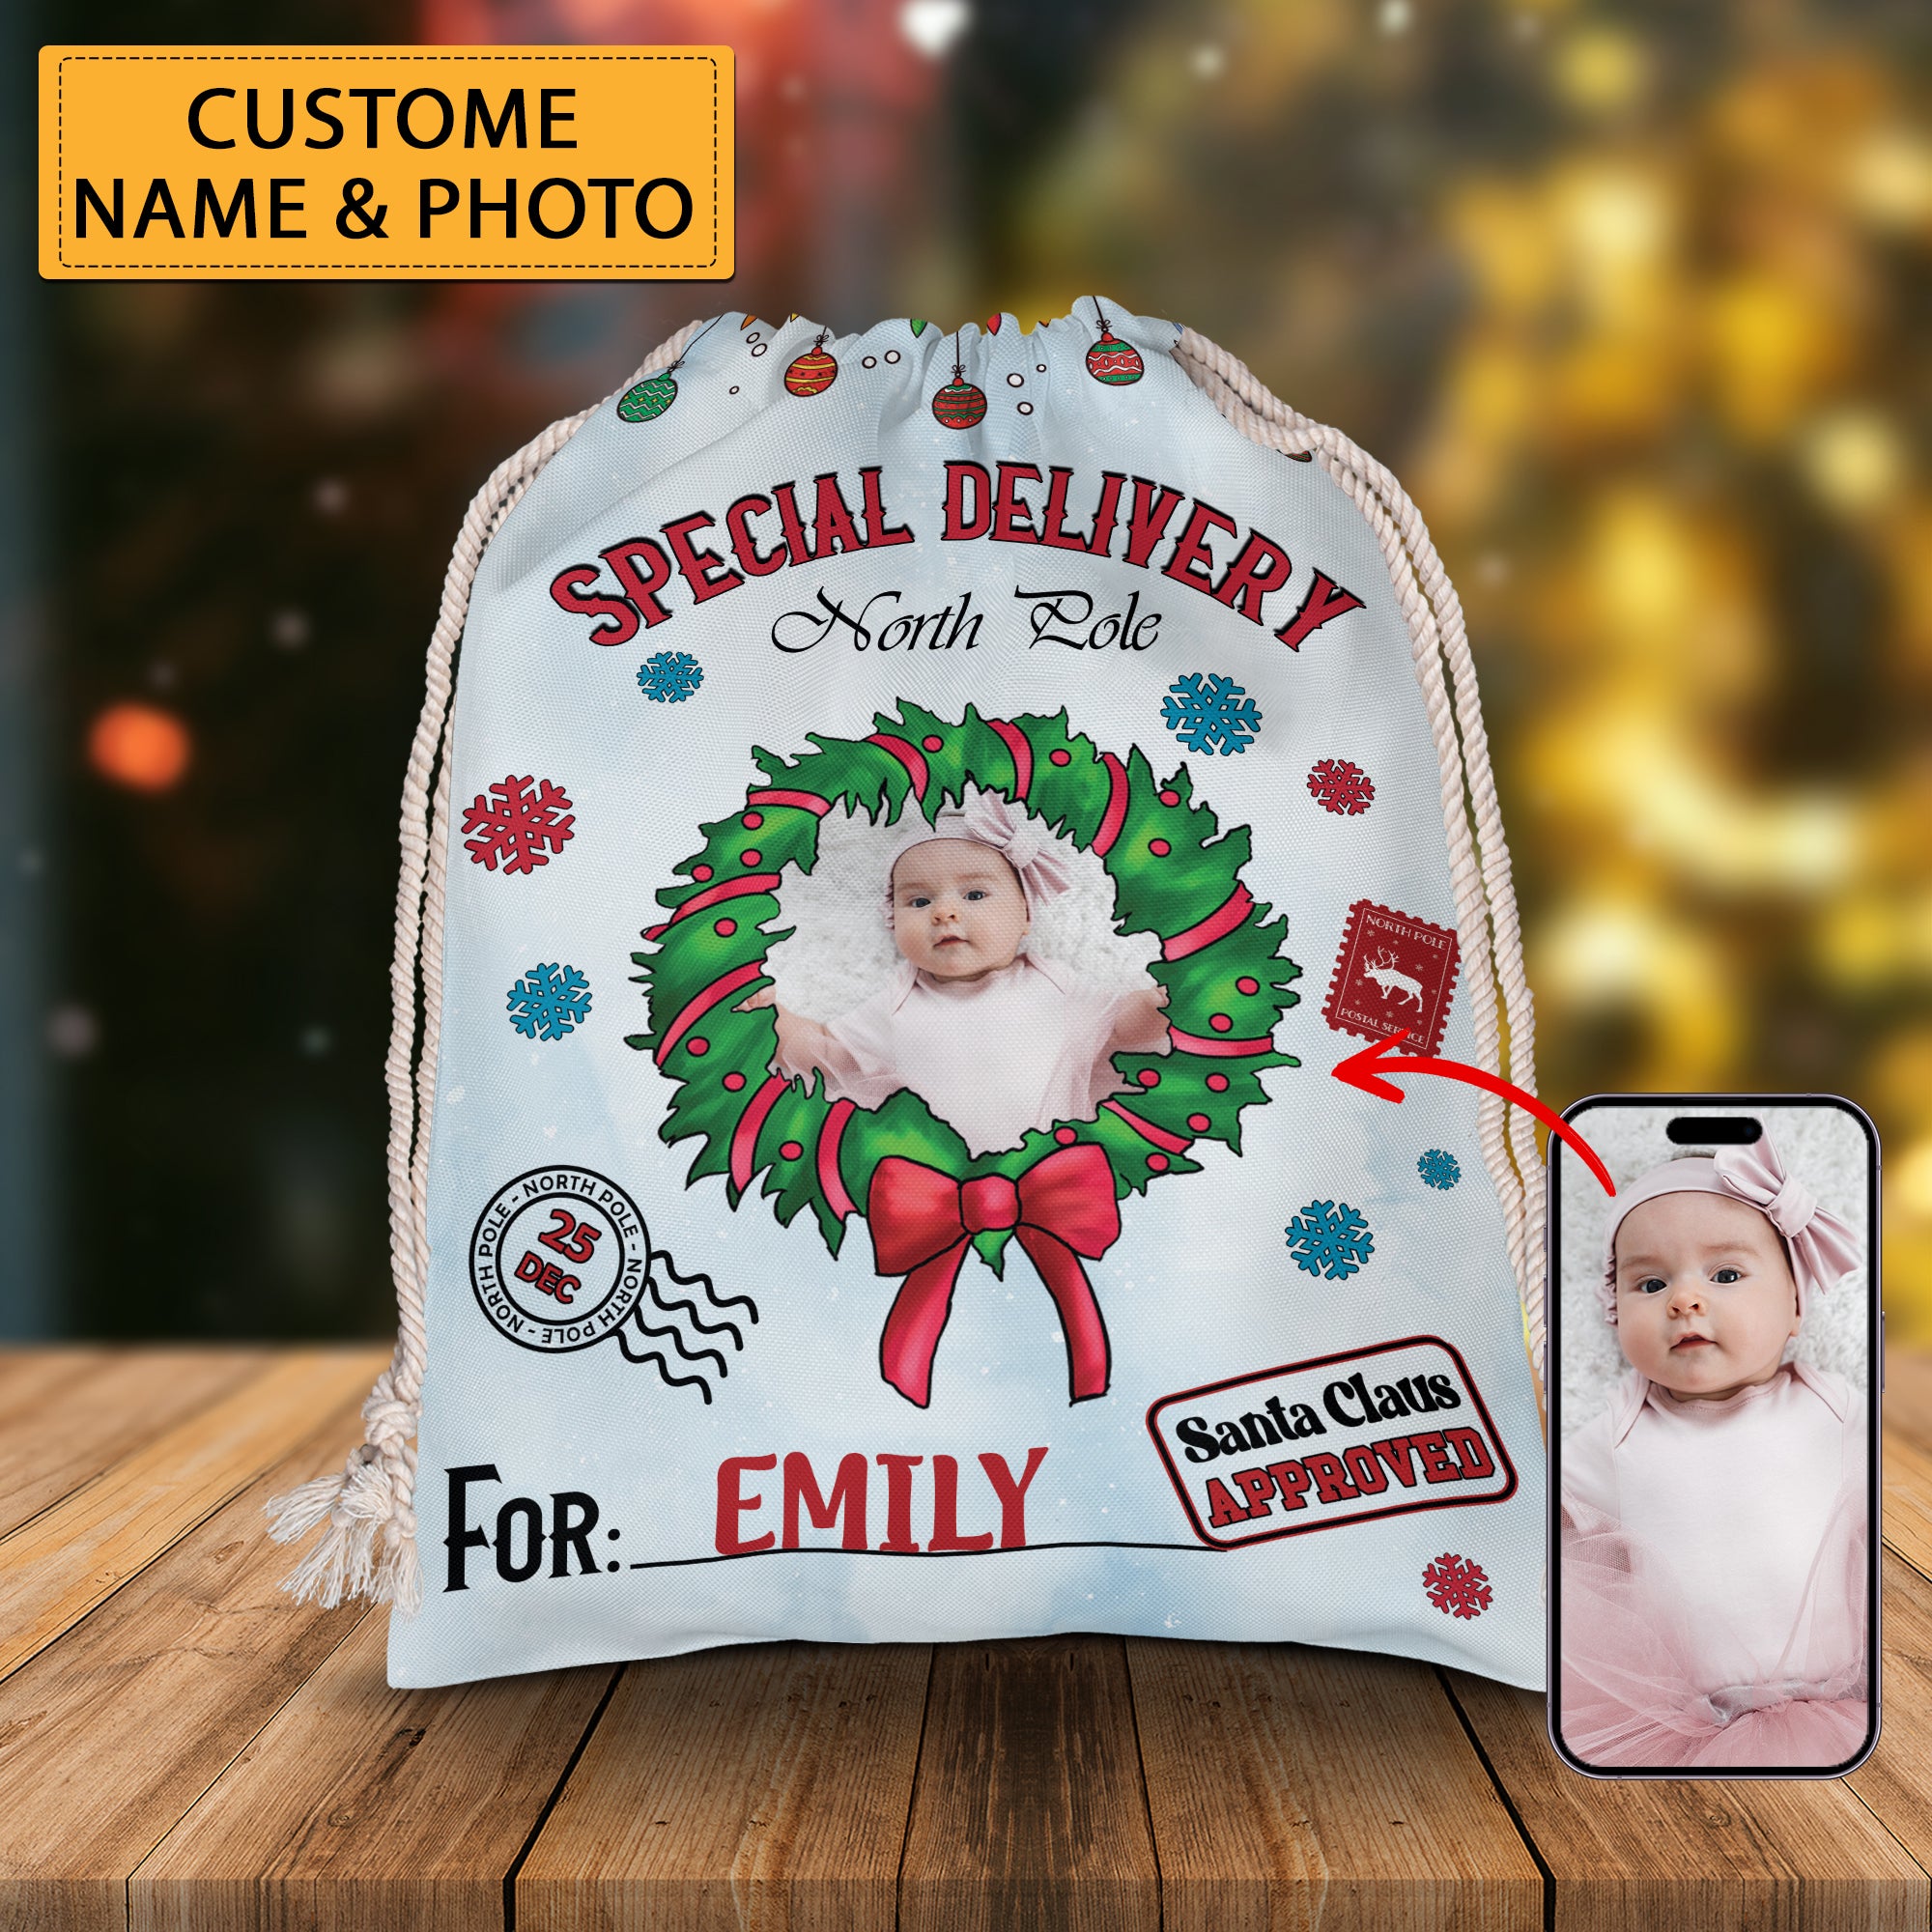 Merry Christmas Special Delivery North Pole For Kid - Custom Photo And Name, Personalized String Bag, Gift For Family, Christmas Gift